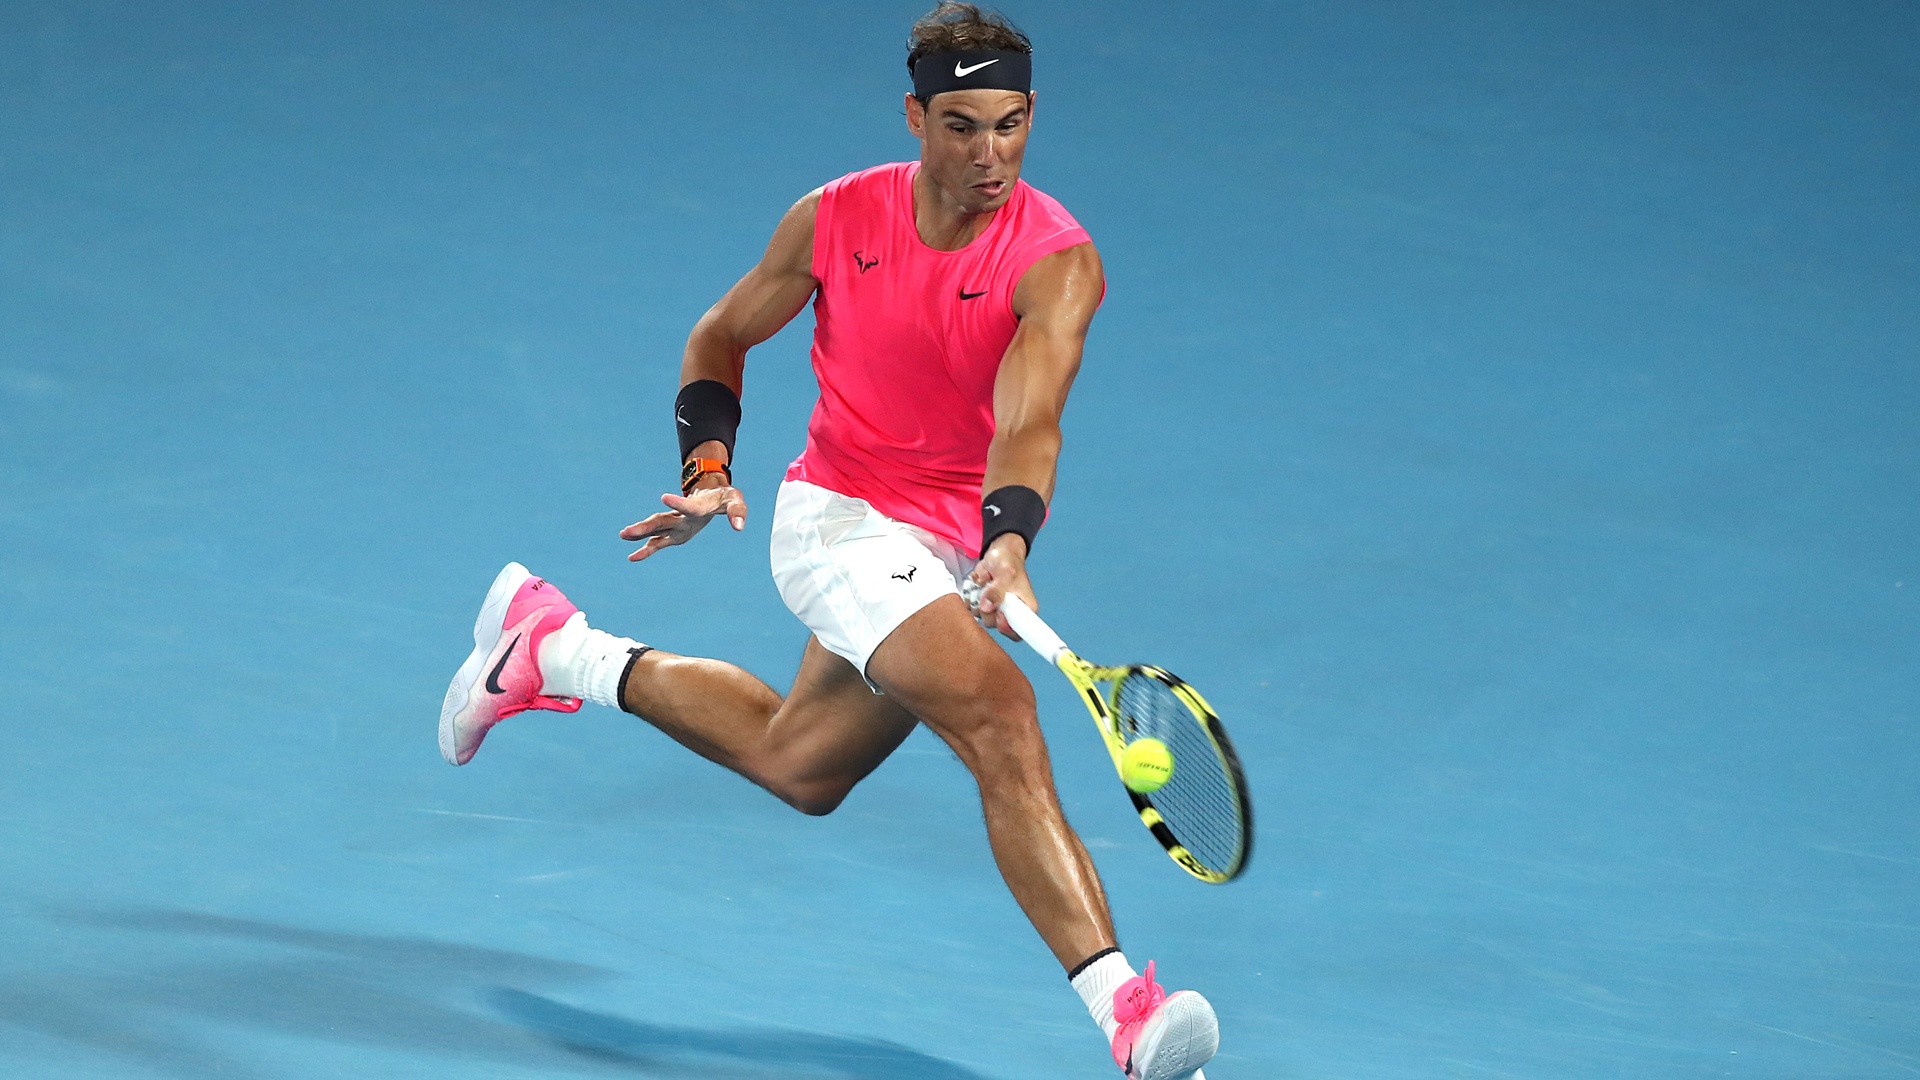 Australian Open 2020 Rafael Nadal results and form ahead of quarter-final with Dominic Thiem